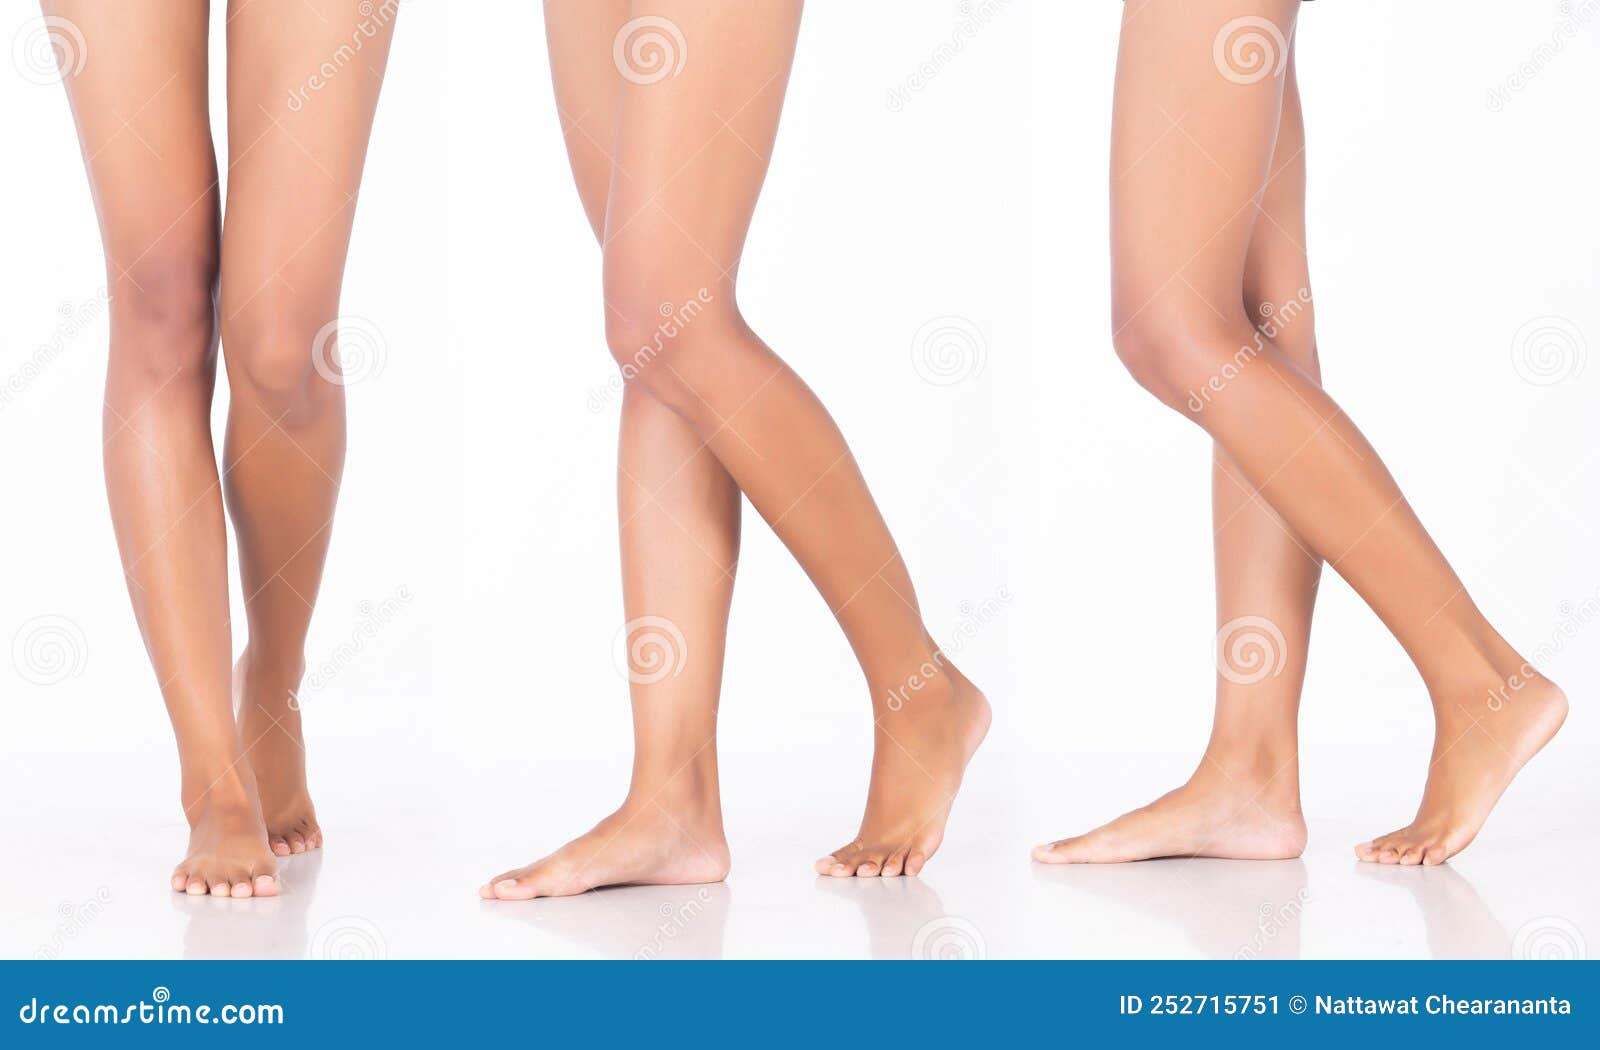 tanned skin woman show legs knee bare foots toe, walking forward side, white background 